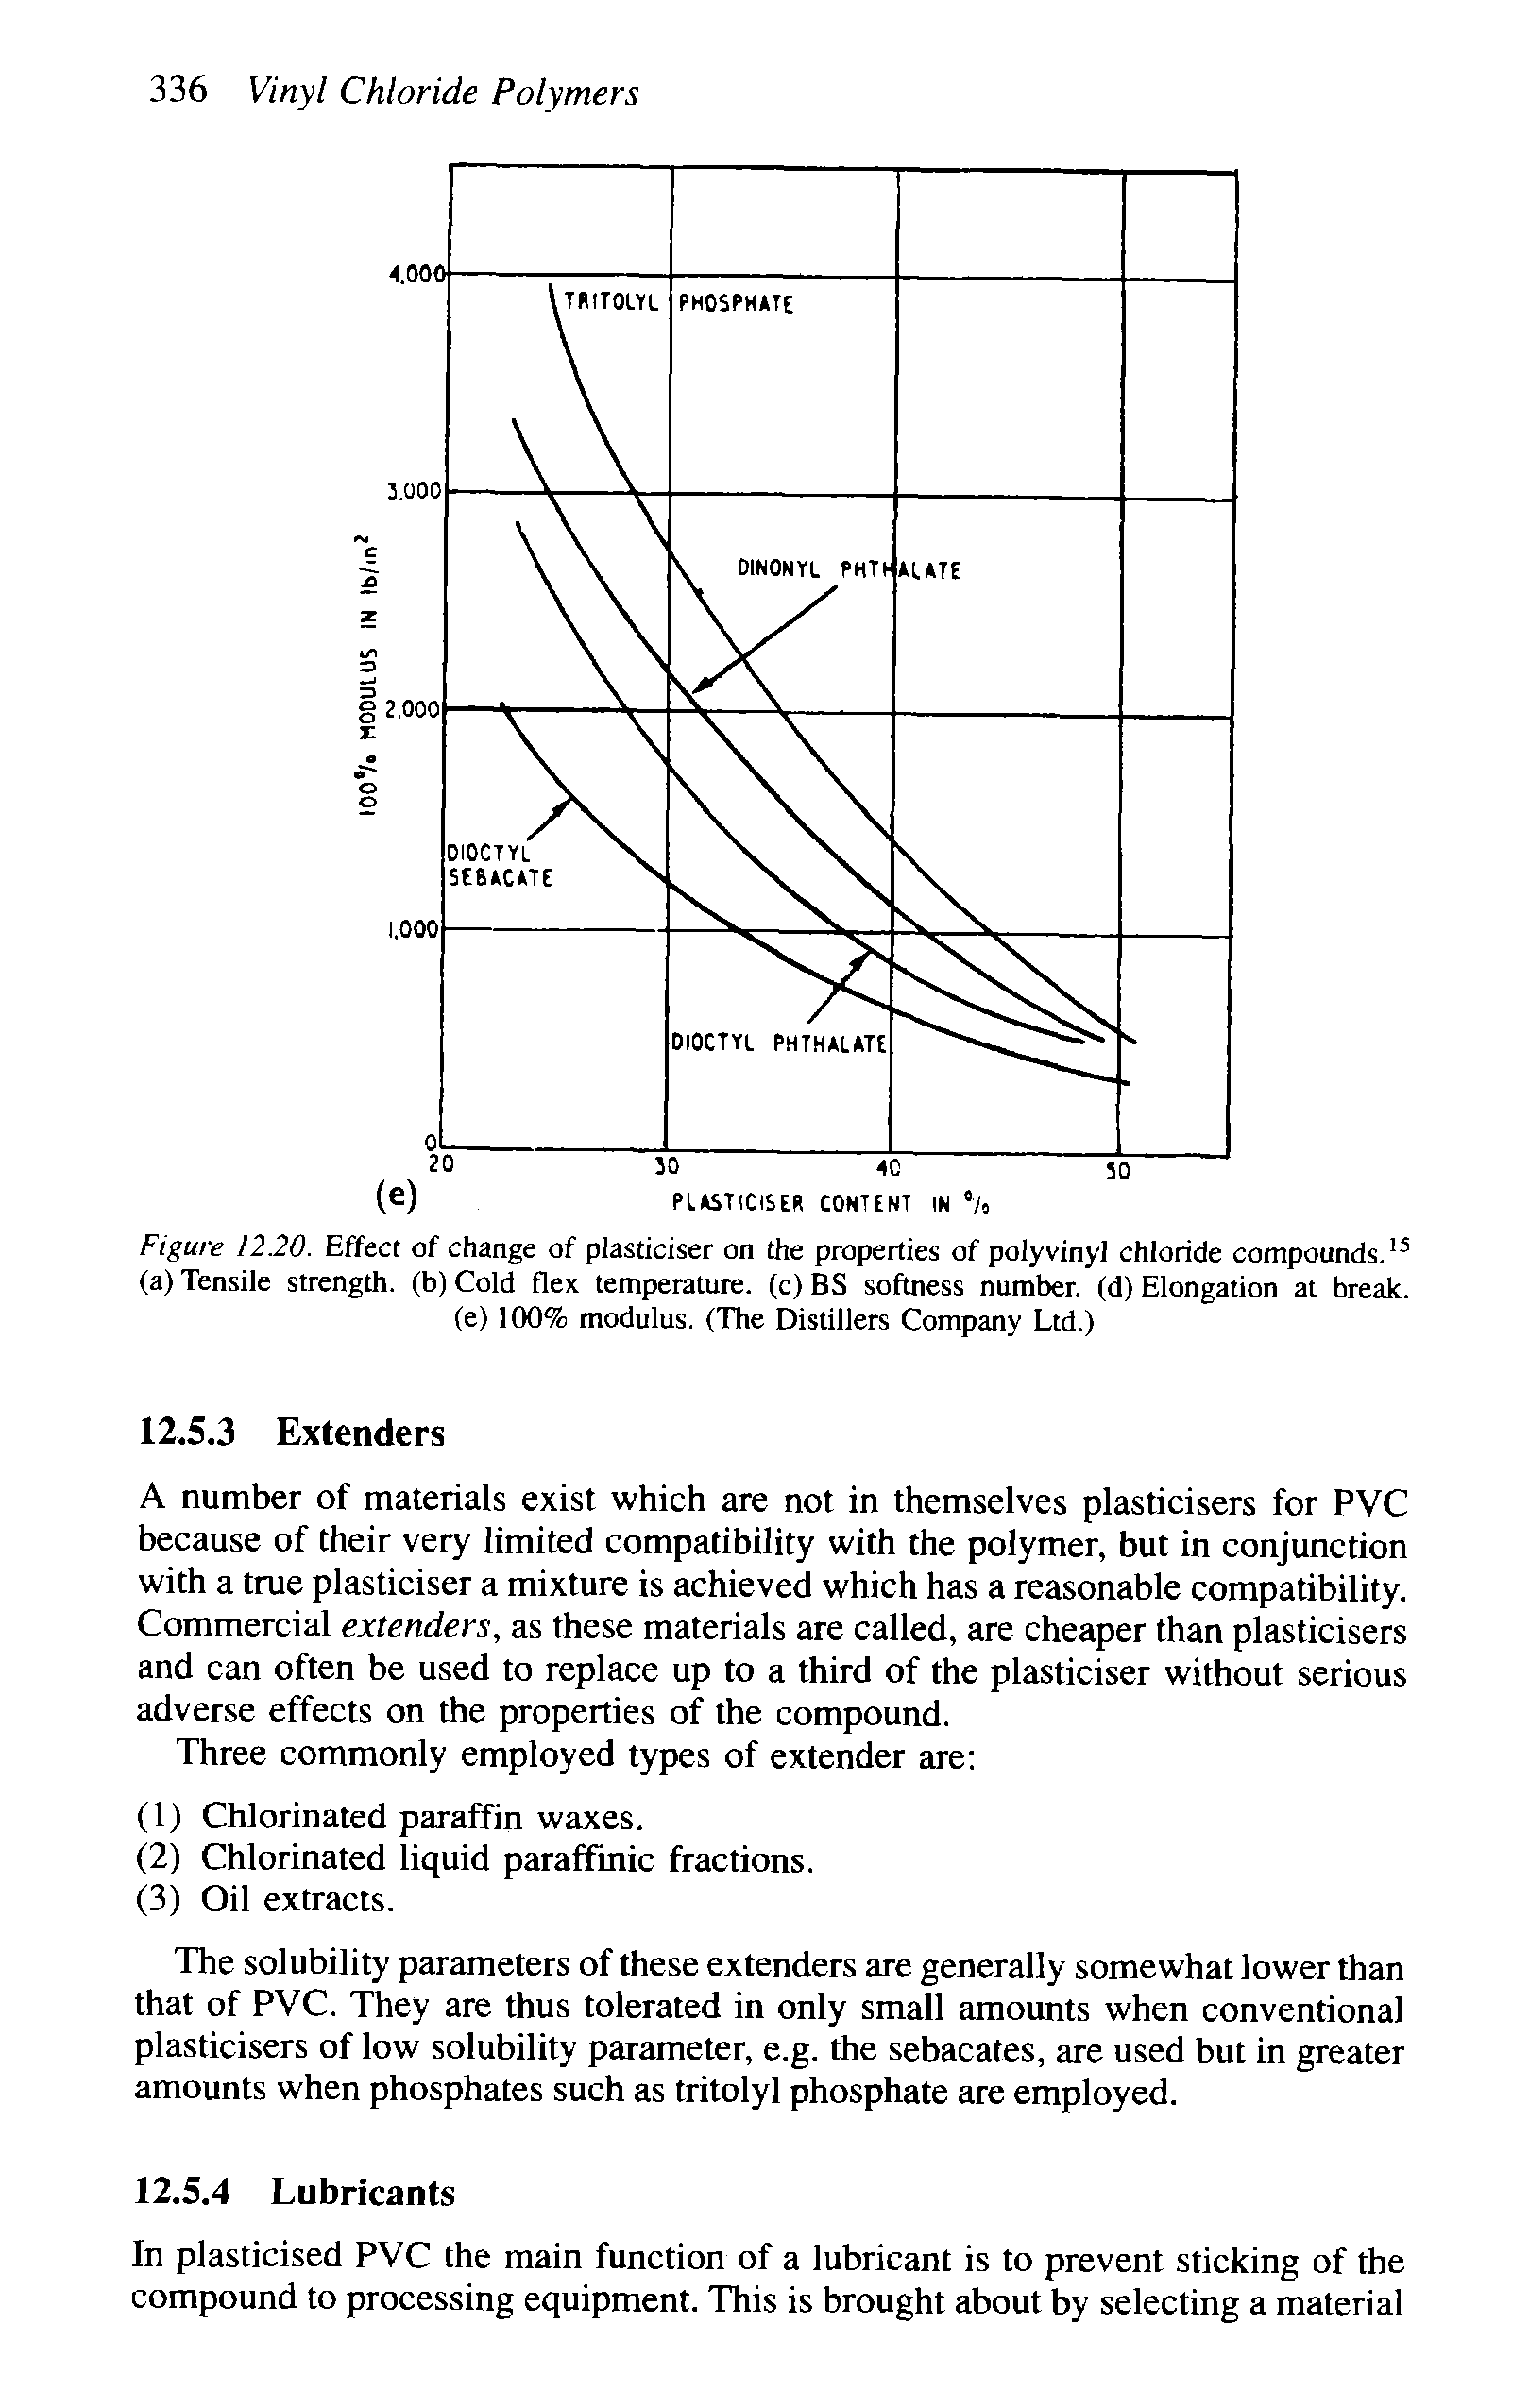 Figure 12.20. Effect of change of plasticiser on the properties of polyvinyl chloride compounds. (a) Tensile strength, (b) Cold flex temperature, (c) BS softness number, (d) Elongation at break, (e) 100% modulus. (The Distillers Company Ltd.)...